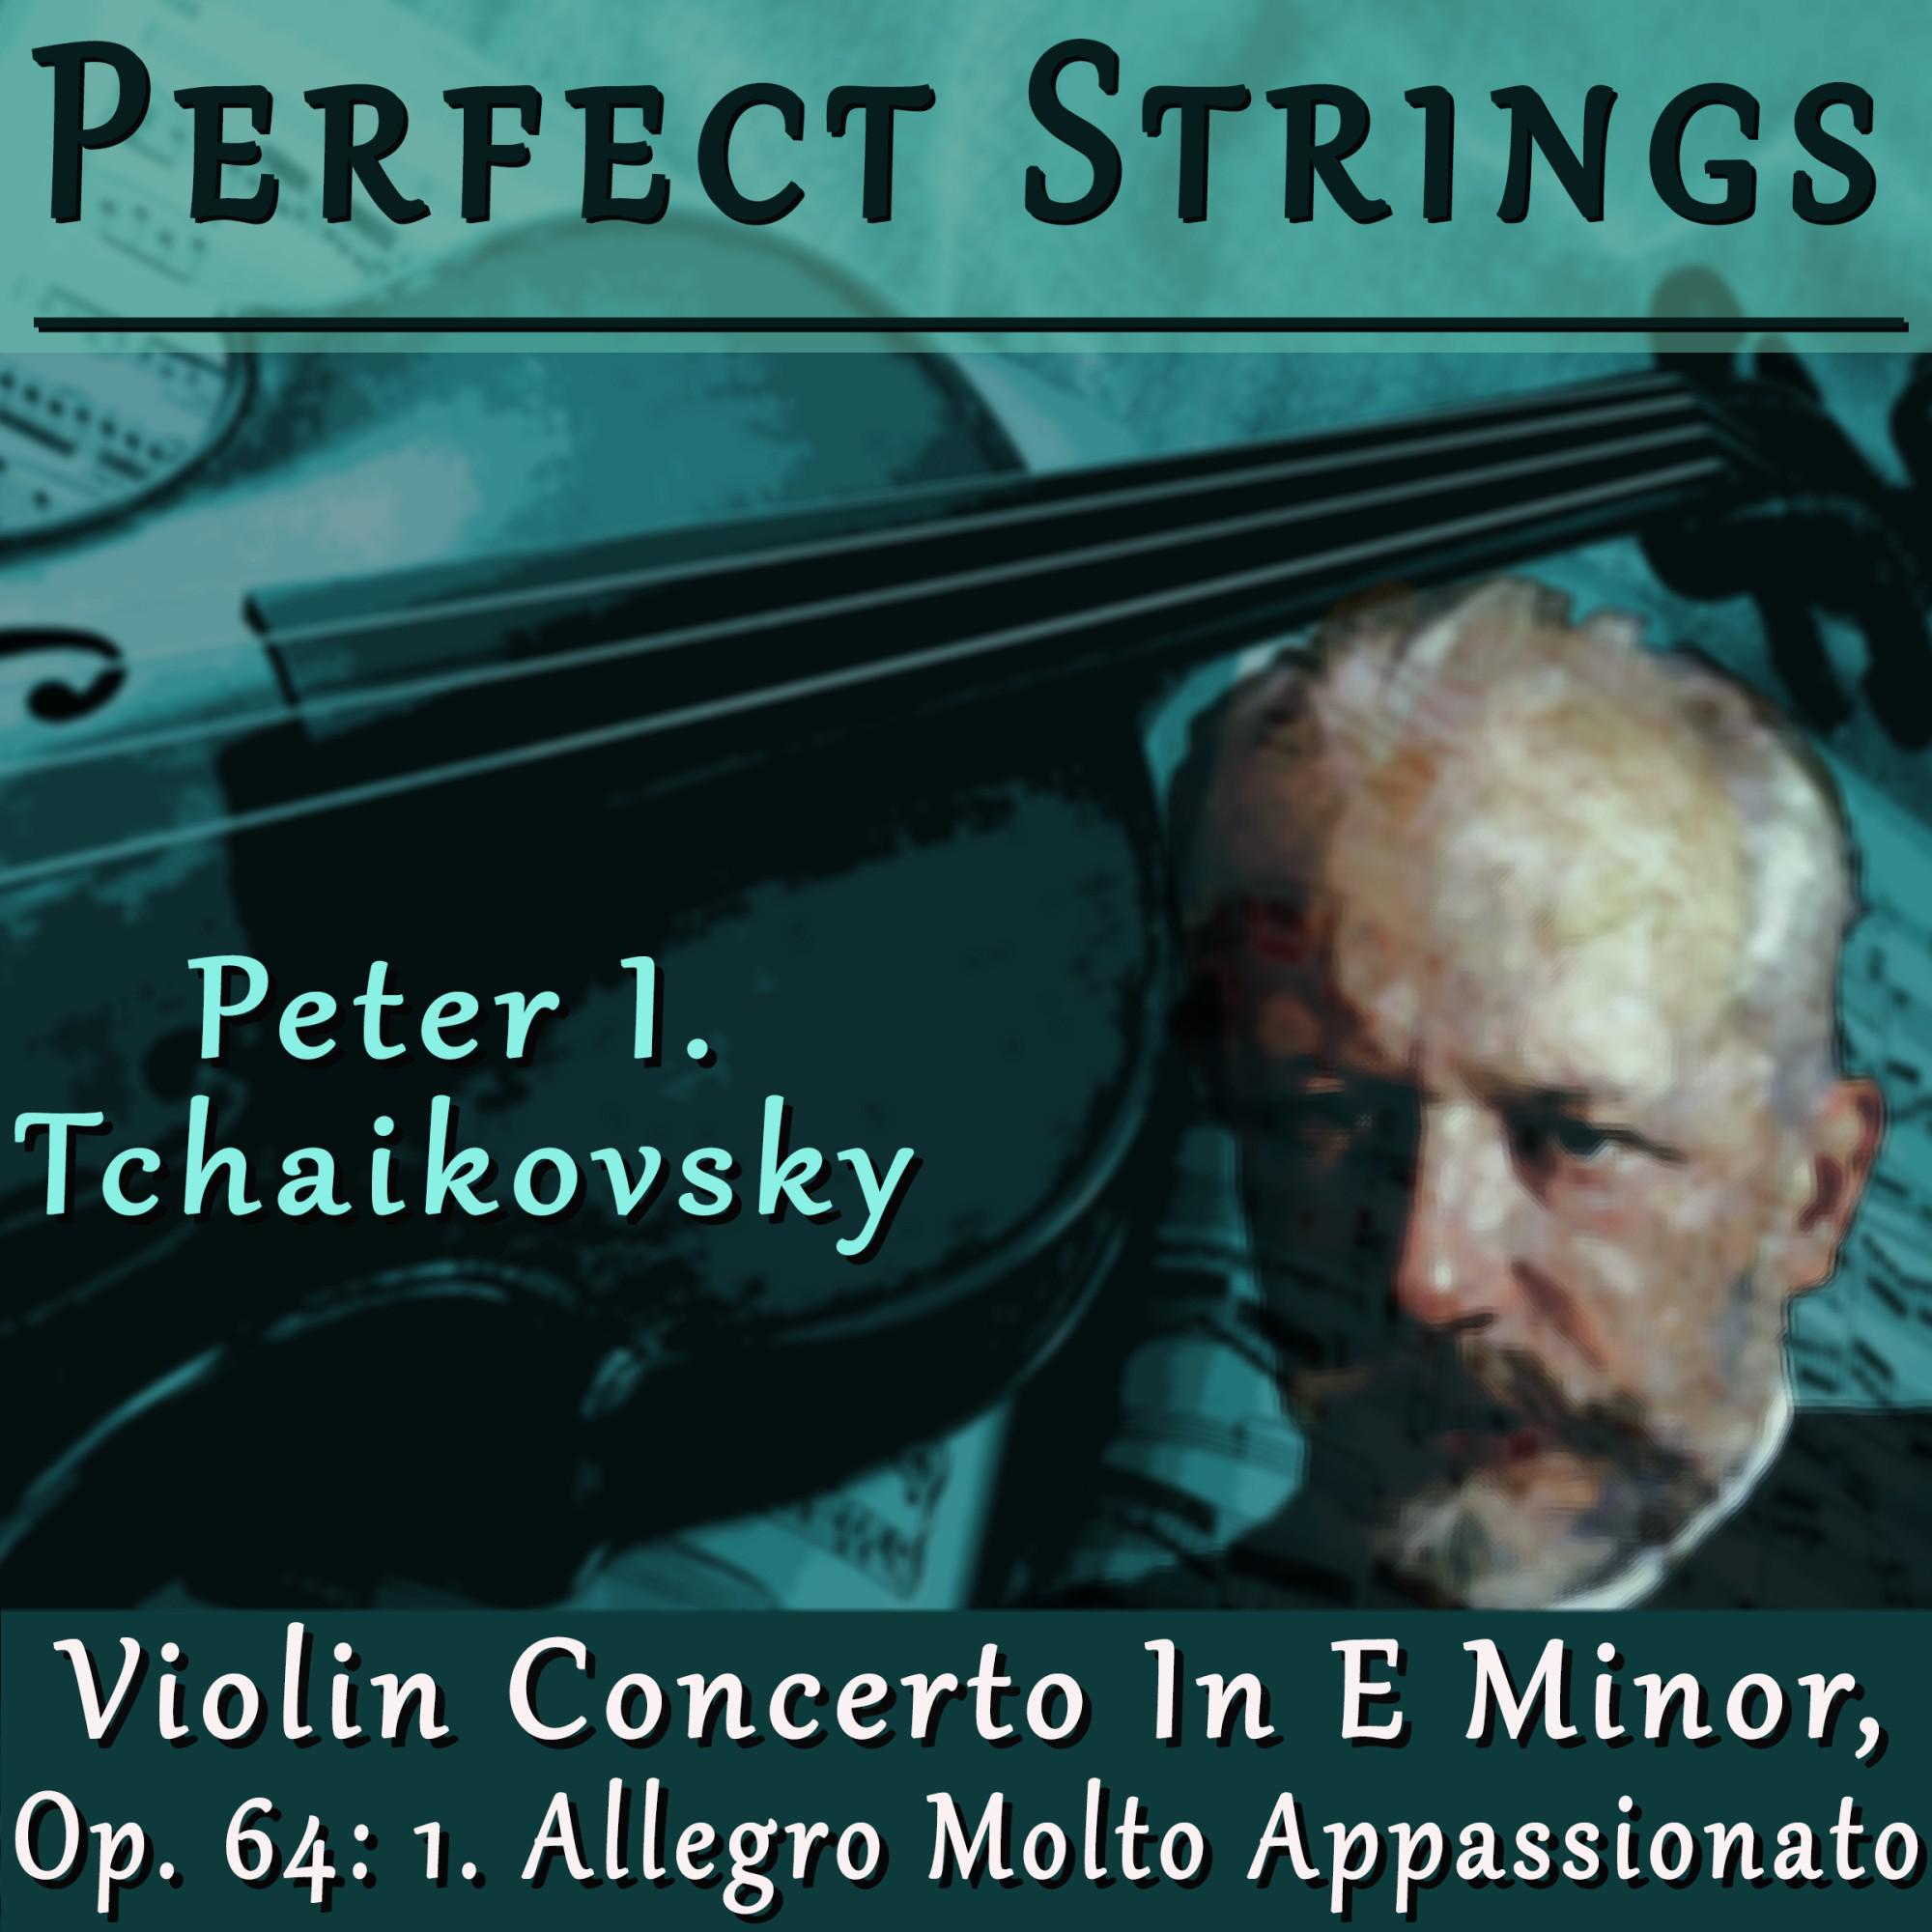 Perfect Strings: Peter I. Tchaikovsky